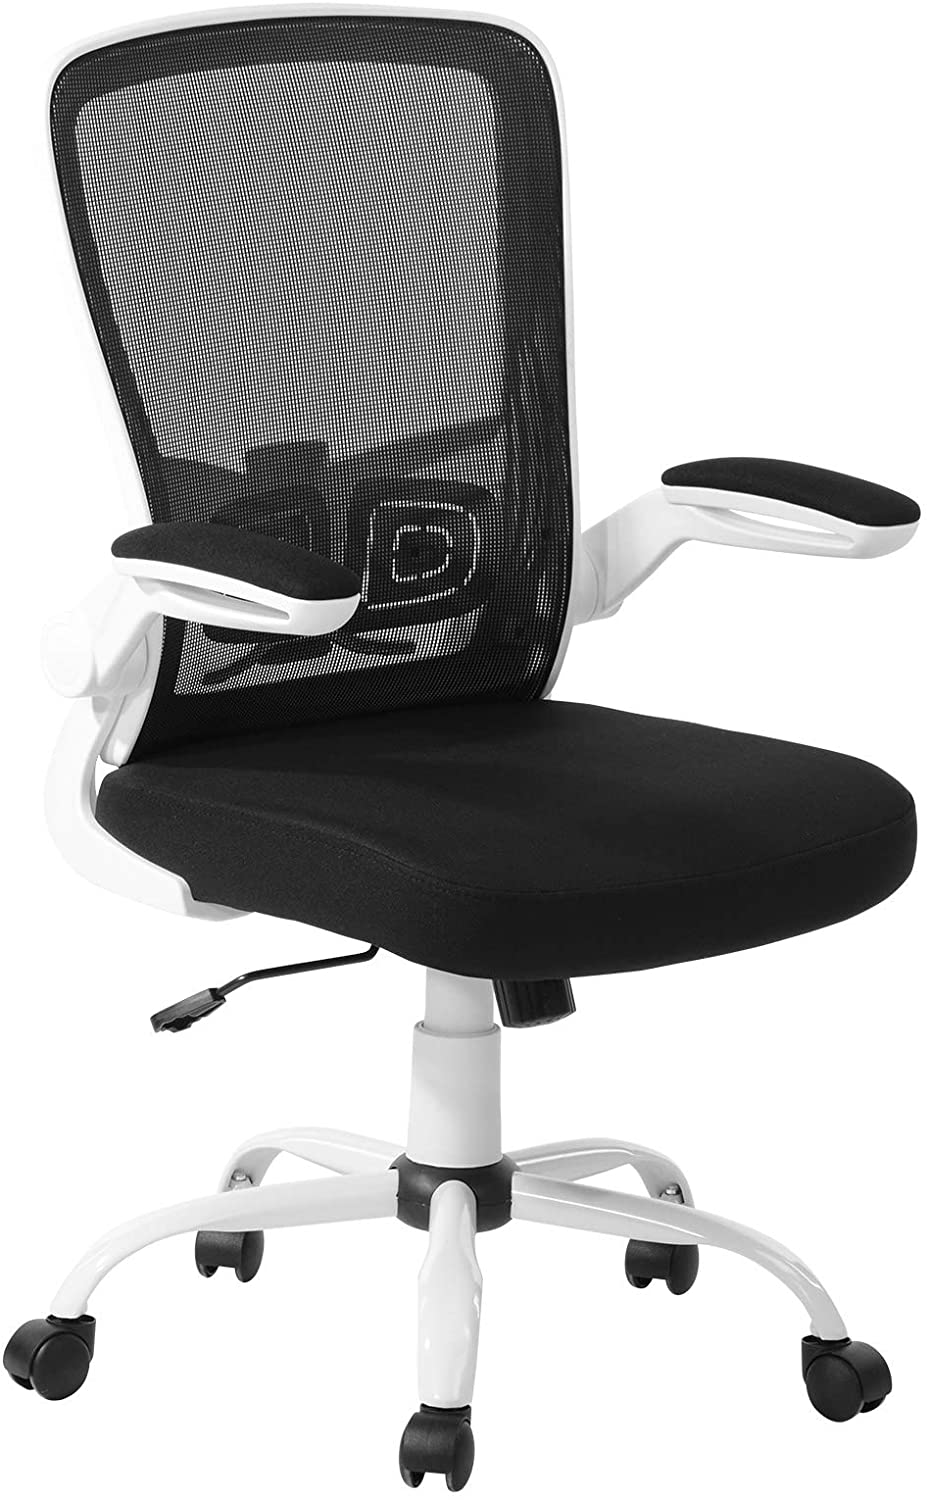 UNICOO - Mid Back Mesh Computer Chair, Office Task Desk Chair, Swivel Home Comfort Chairs with Padded Flip-up Armrests and Adjustable Lumbar Support (RY-N-01-White)